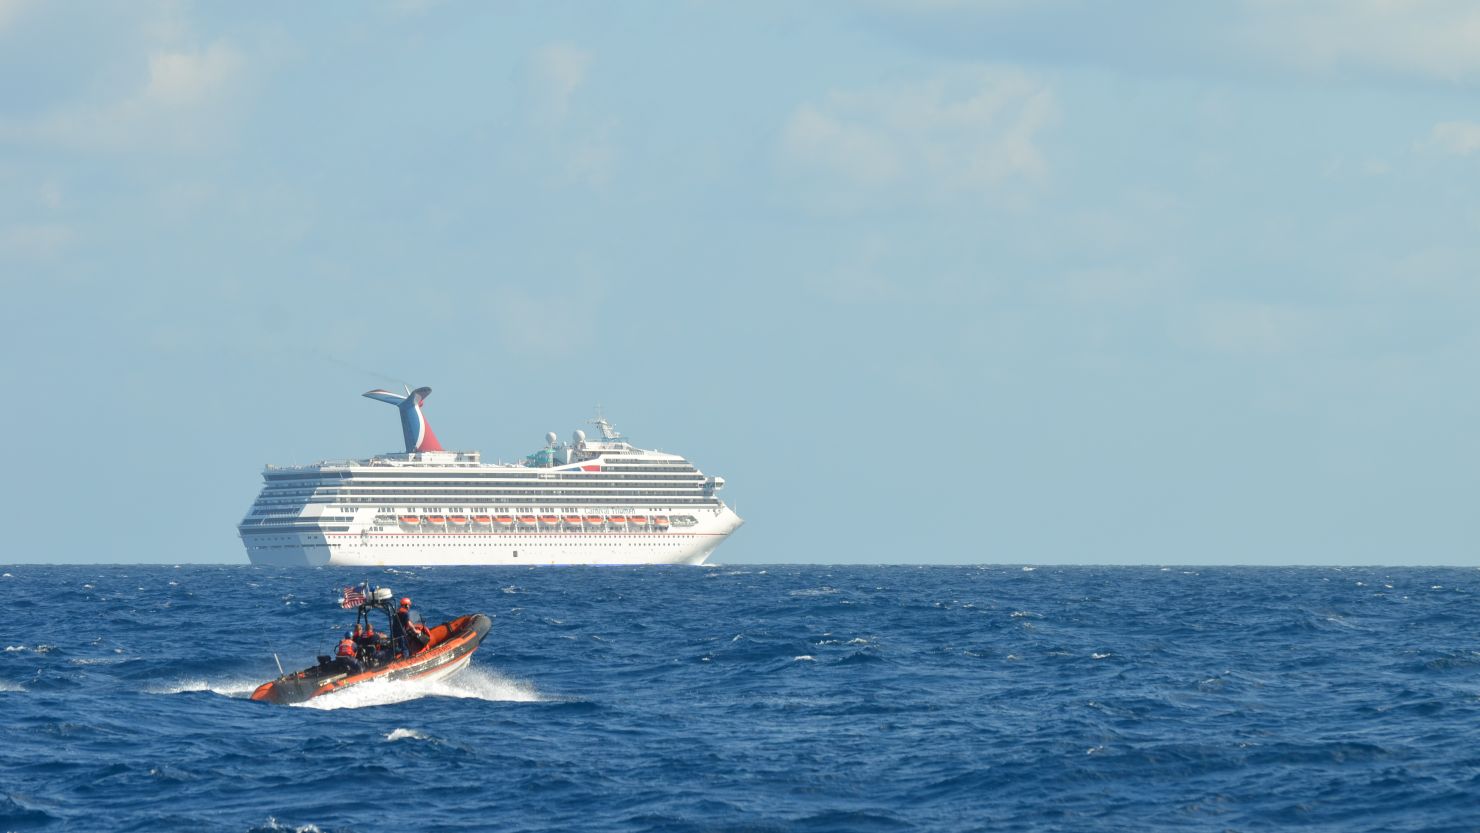 The Carnival Triumph was stranded for days in February after an engine fire knocked out power.